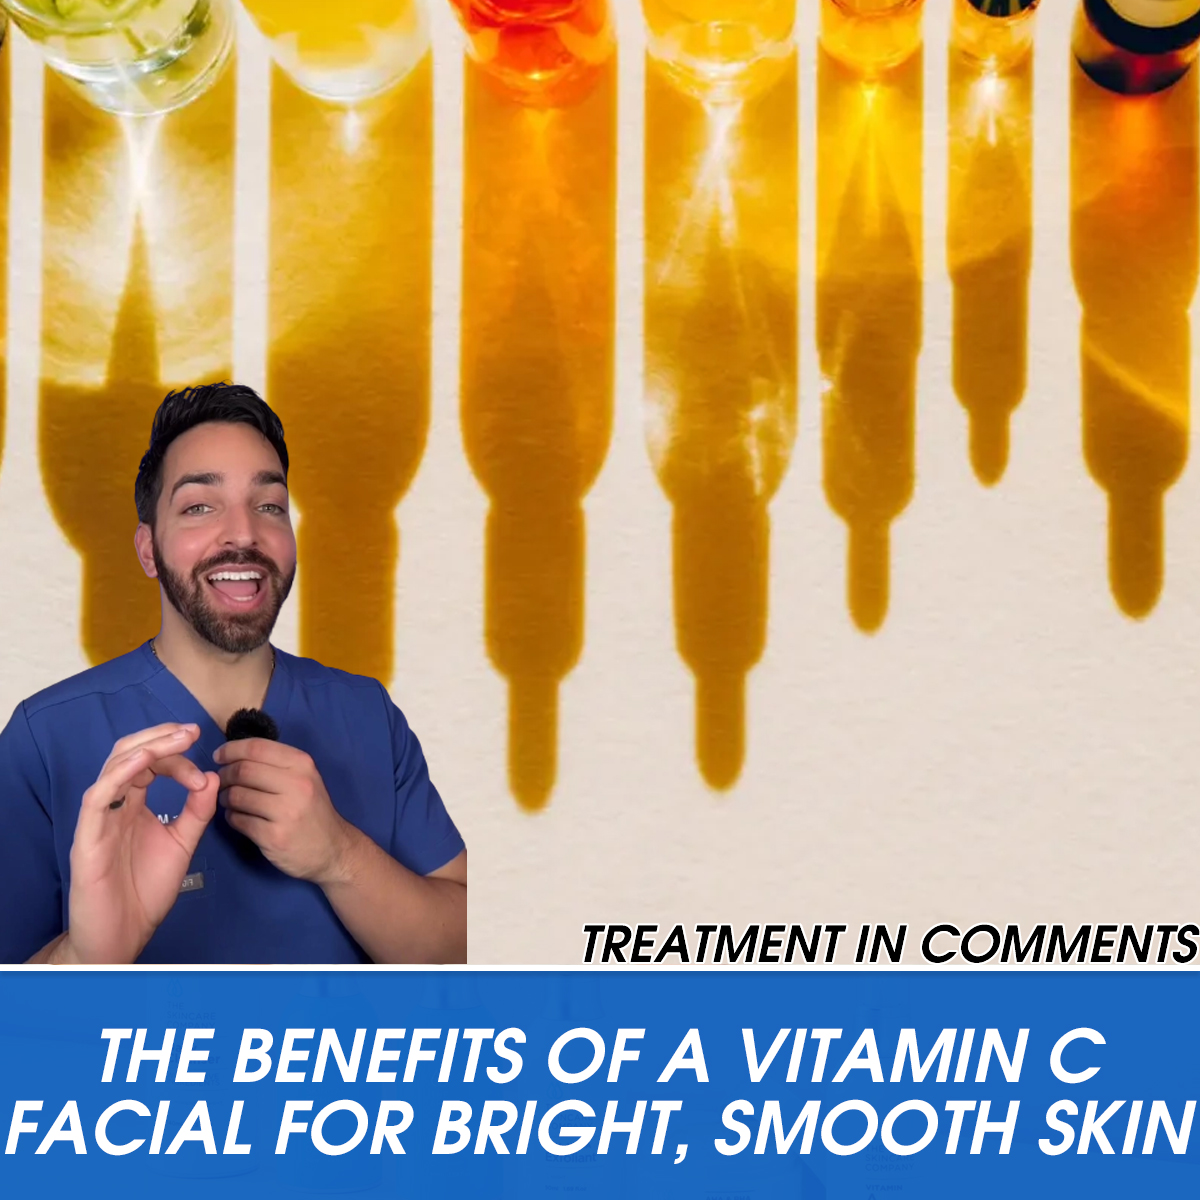 The Benefits of a Vitamin C Facial for Bright, Smooth Skin